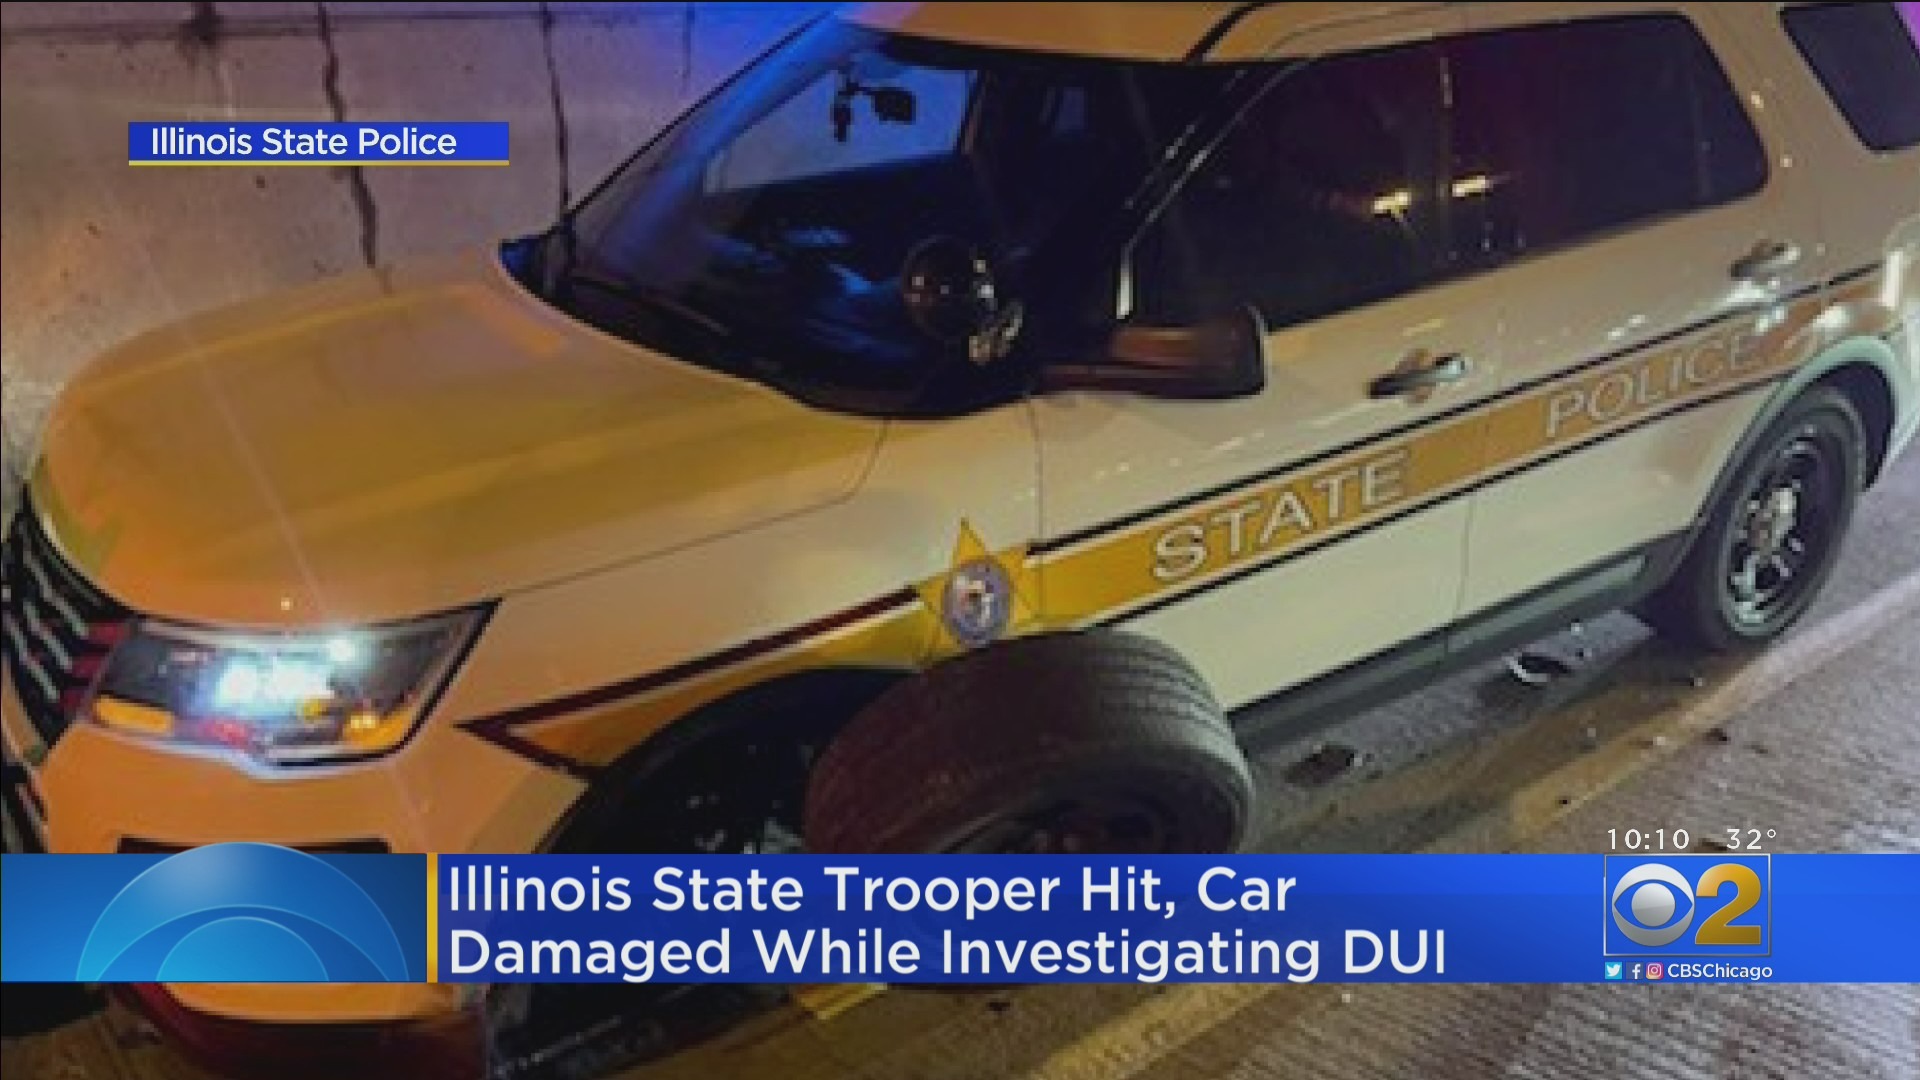 State Trooper Conducting DUI Investigation Struck By Another Suspected Drunk Driver